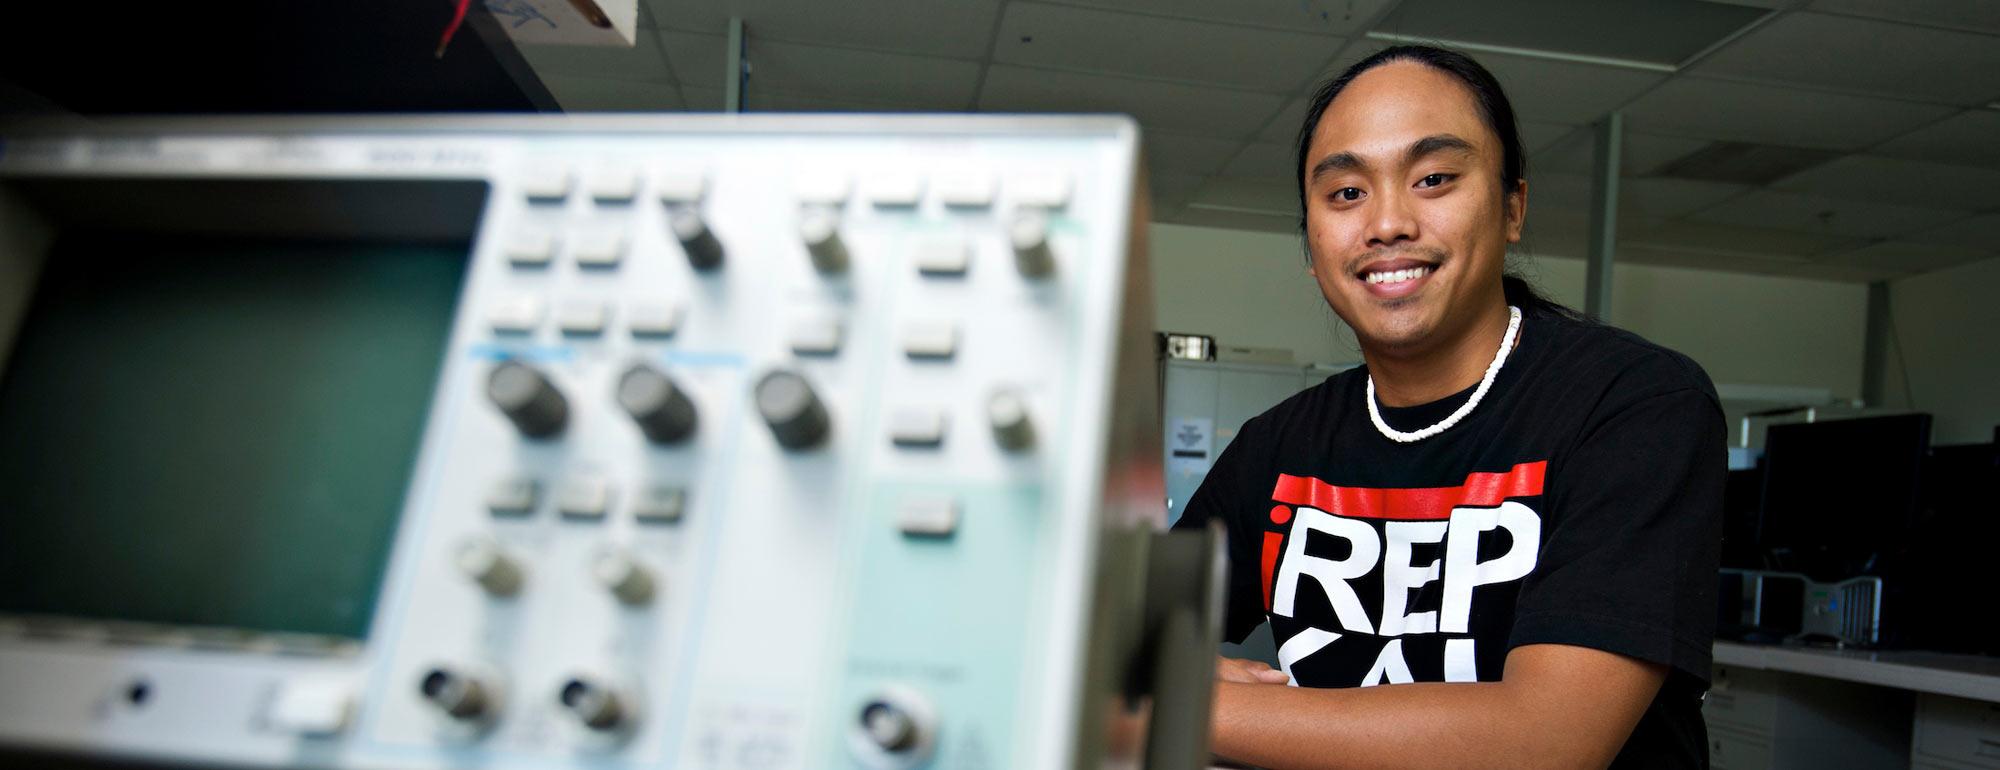 A male student poses next to some engineering lab equipment